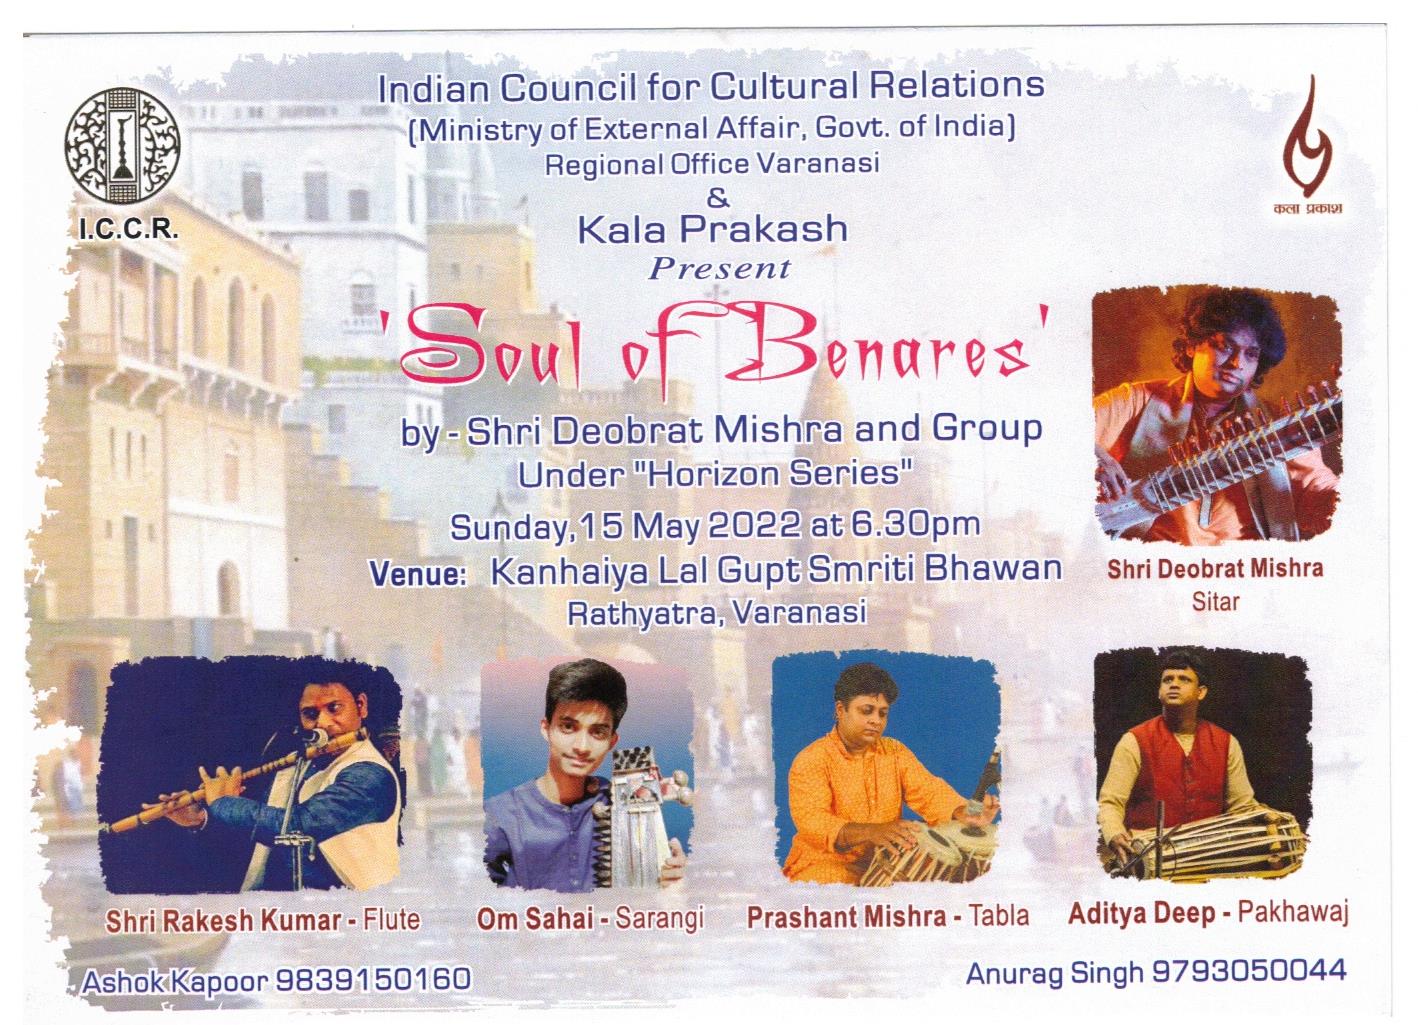 The ICCR(MEA, GoI), Regional Office Varanasi in collaboration with Kala Prakash is going to present 'Soul of Benares' by Shri Deobrat Mishra & Group under 'Horizon Series' on 15th May 2022 at 06.30 p.m.